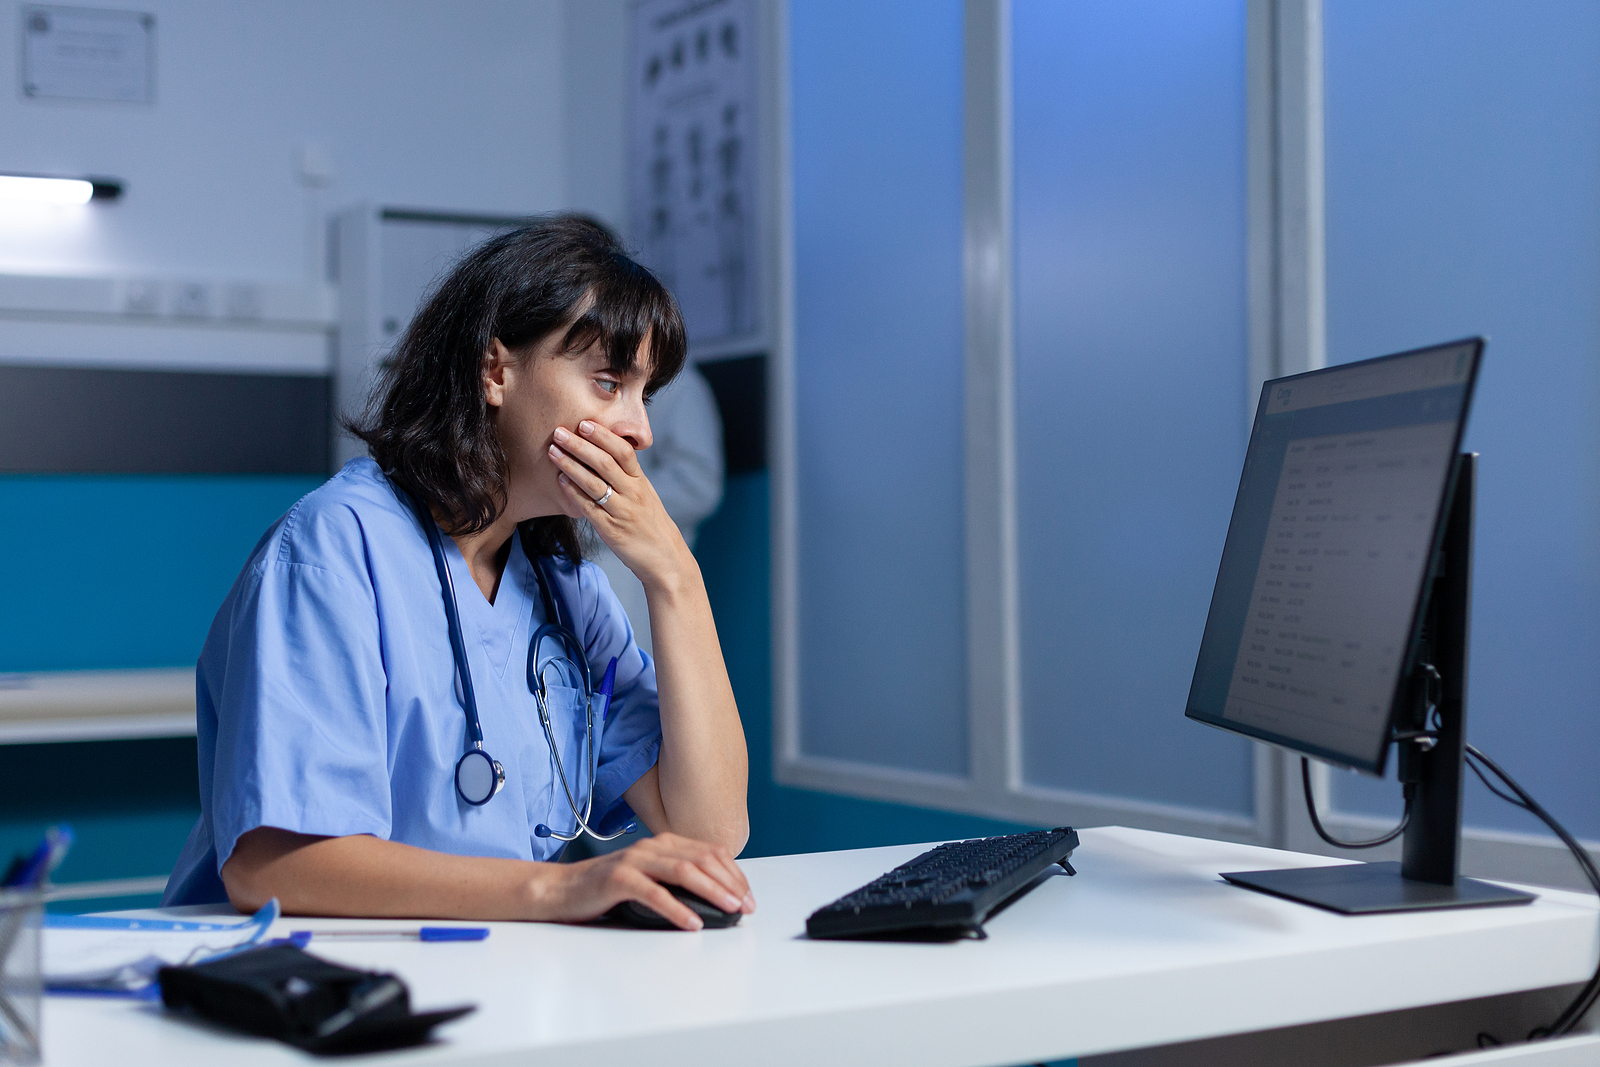 Tired nurse using computer on desk while falling asleep, working late. Medical assistant looking at monitor screen and feeling sleepy after overtime work at night in healthcare cabinet.